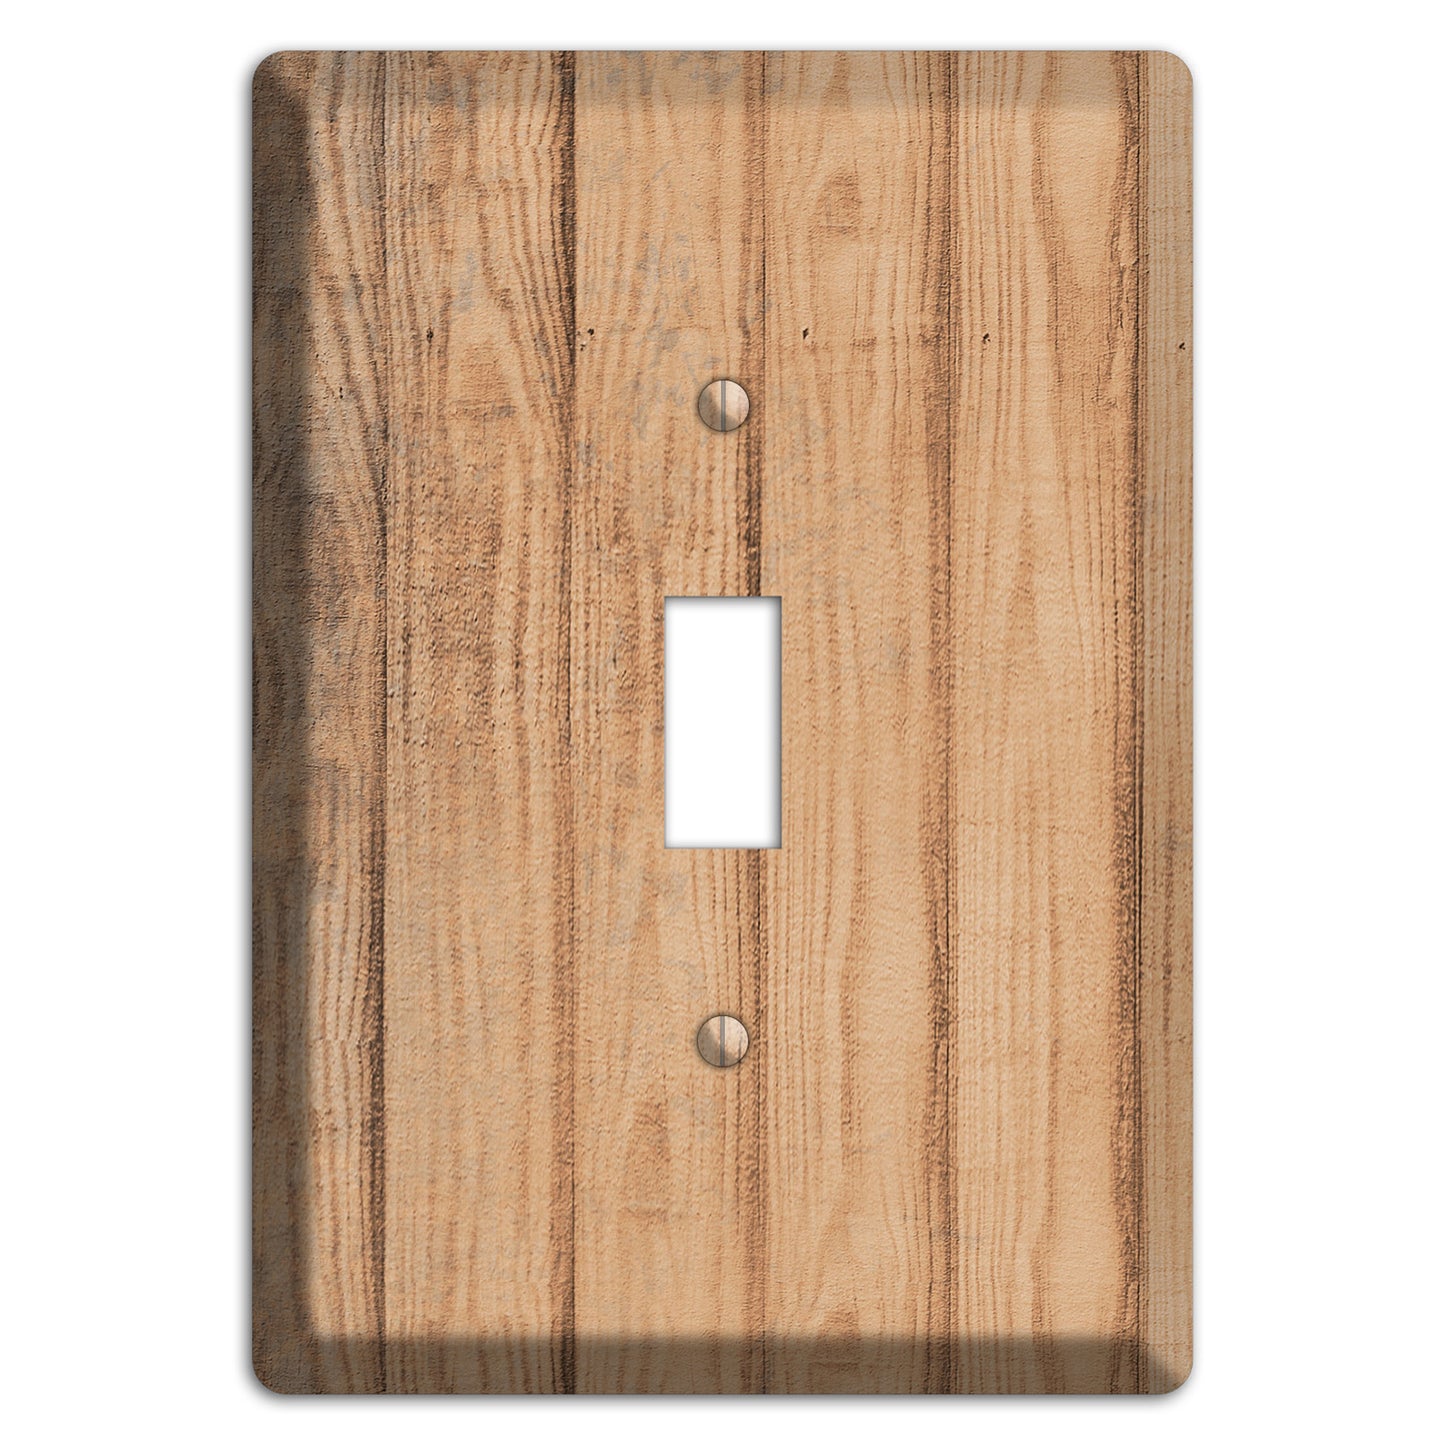 Tan Weathered Wood Cover Plates